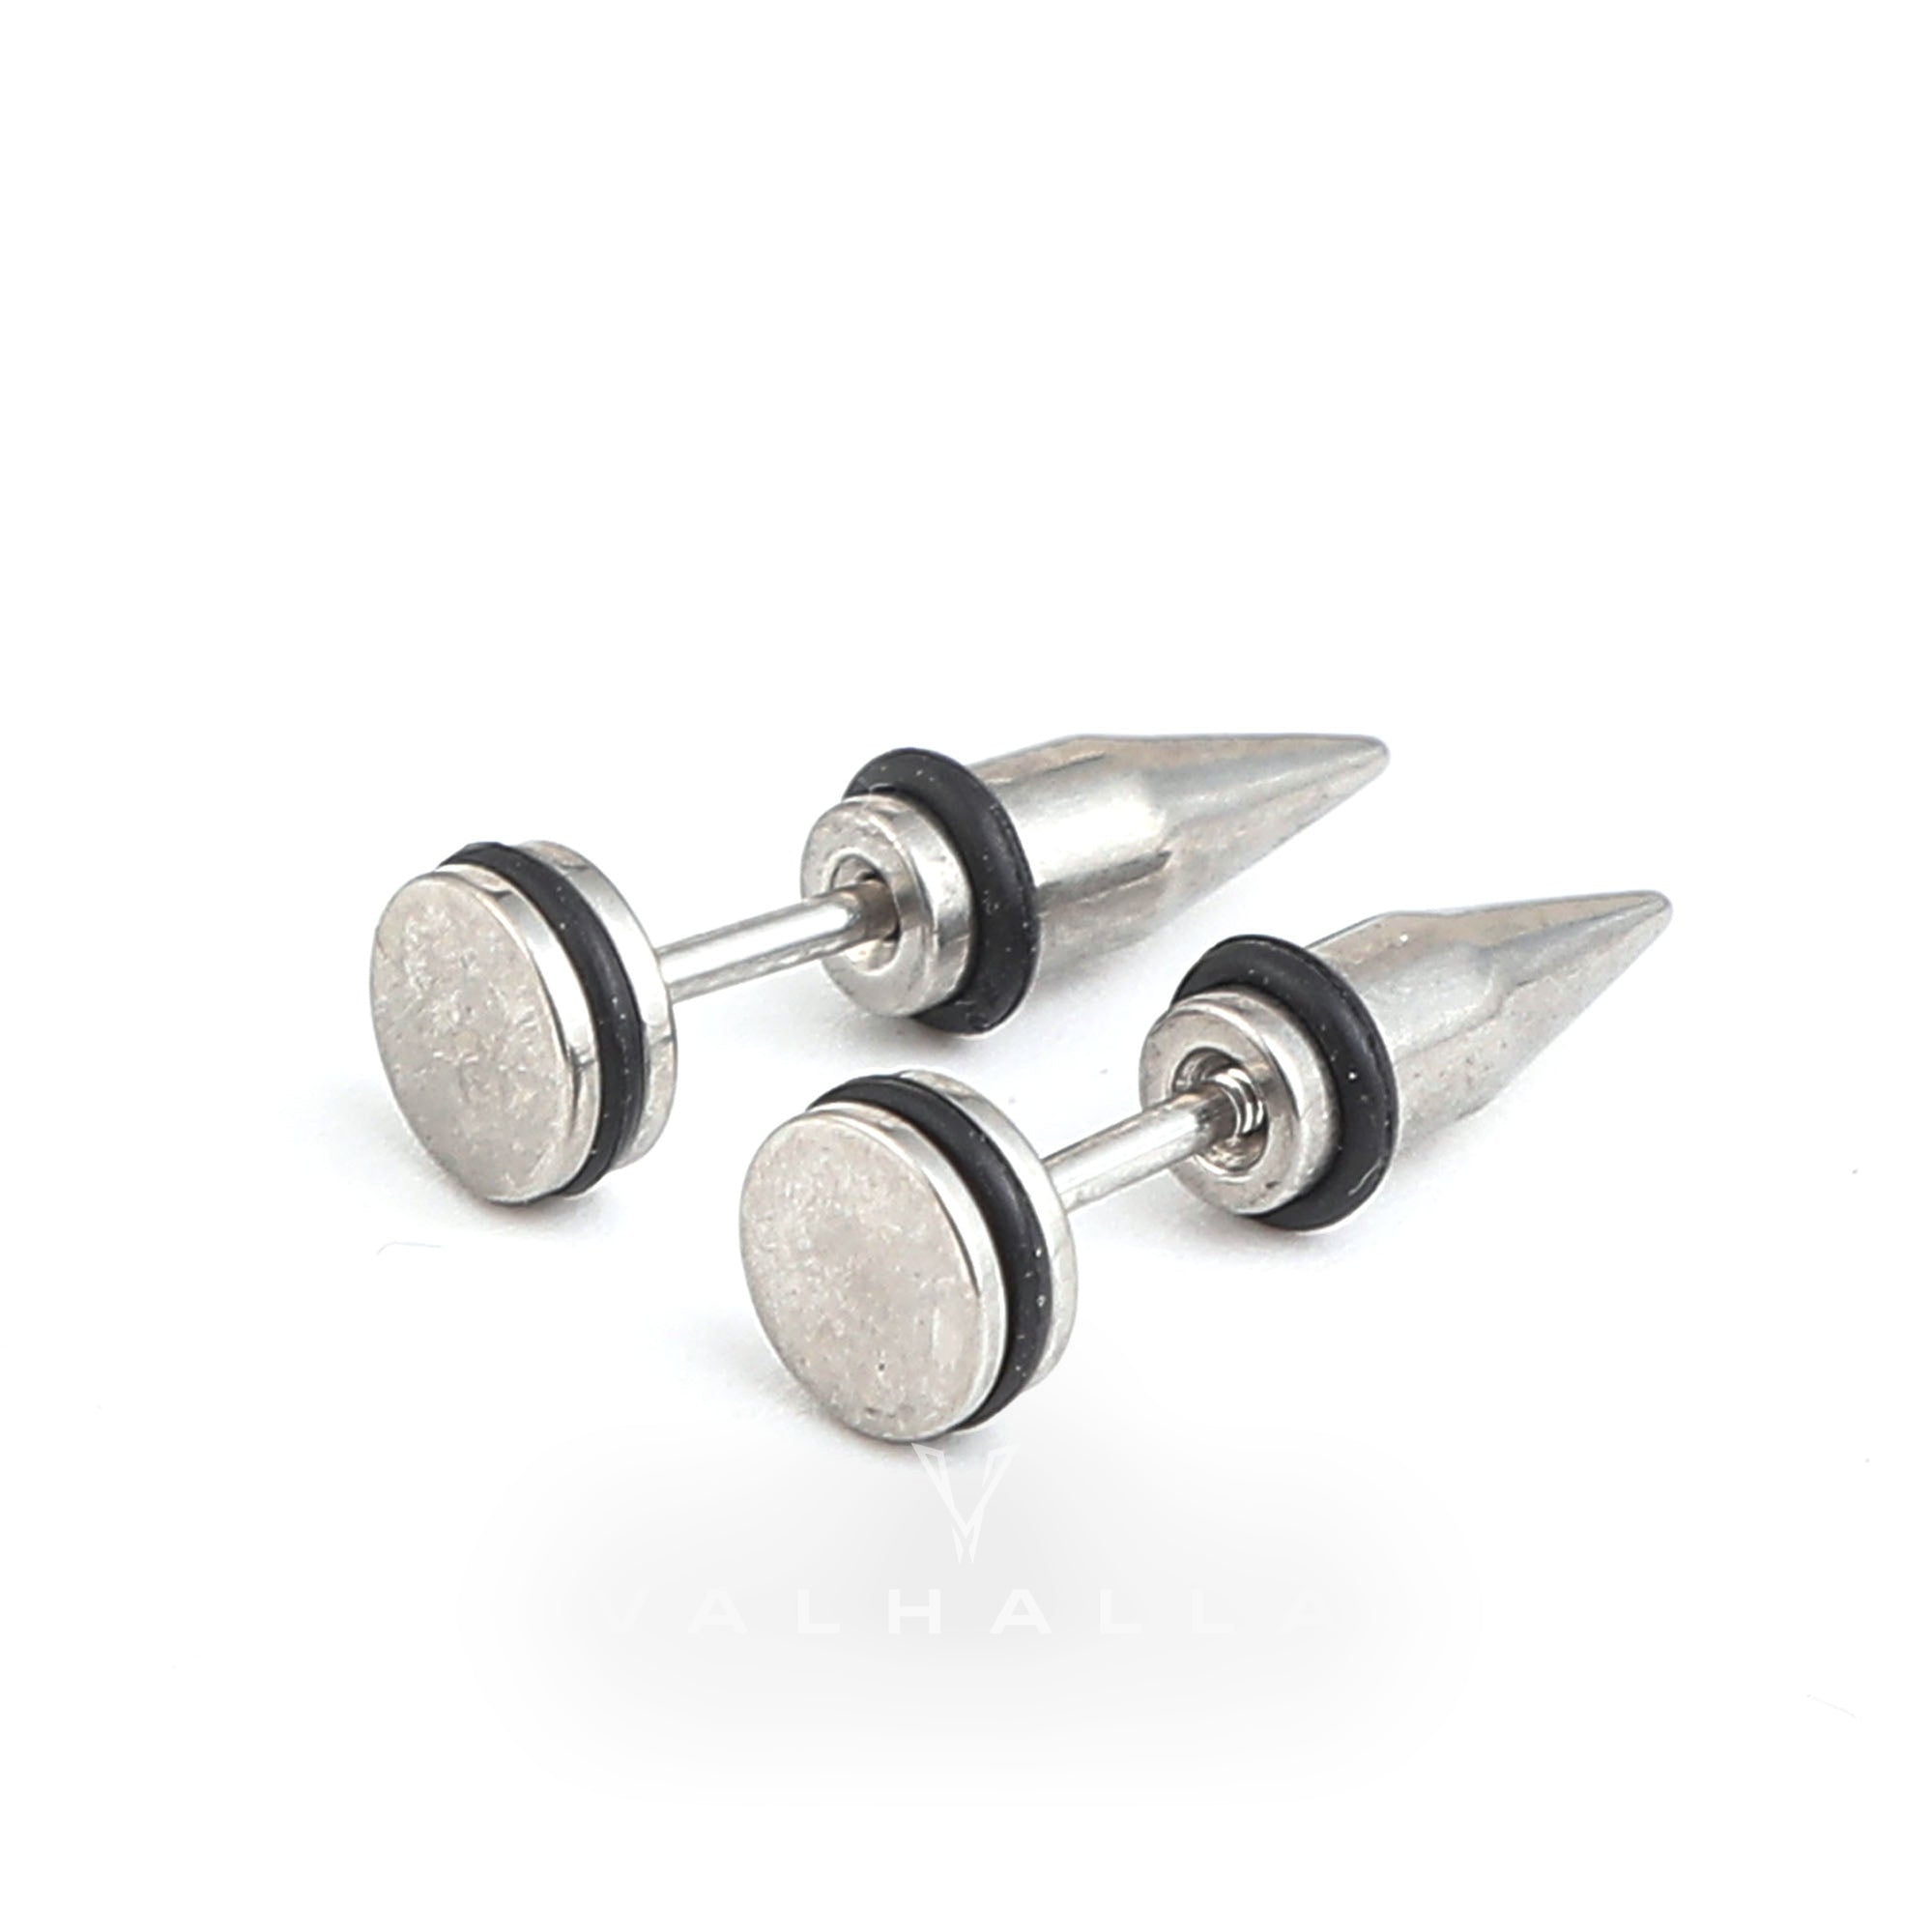 Minimalist Conical Stainless Steel Ear Studs